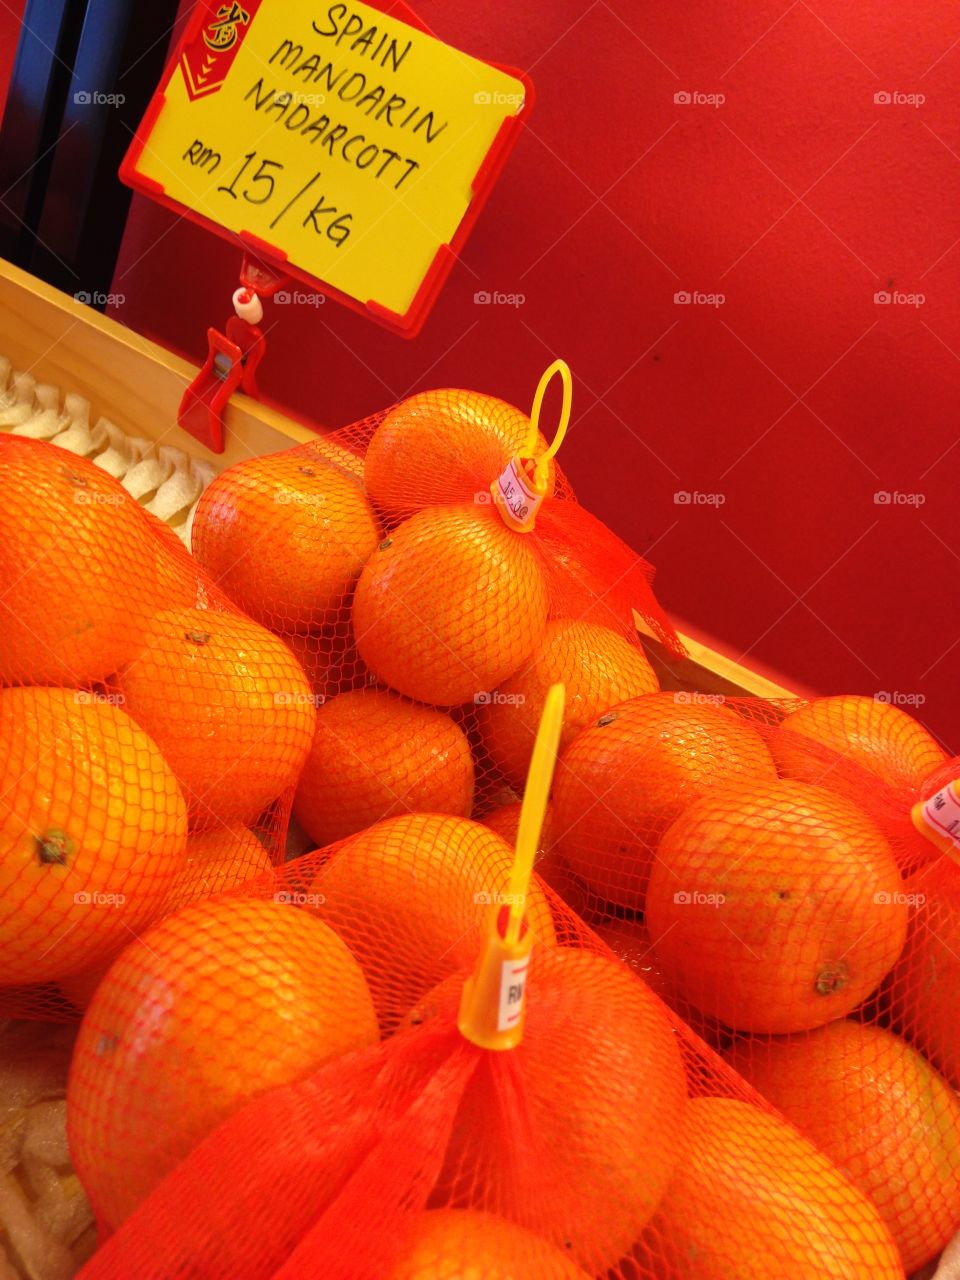 Oranges!  Great orange hue.  These fruits give you zest and inspiration.  Orange contains full of vitamins.